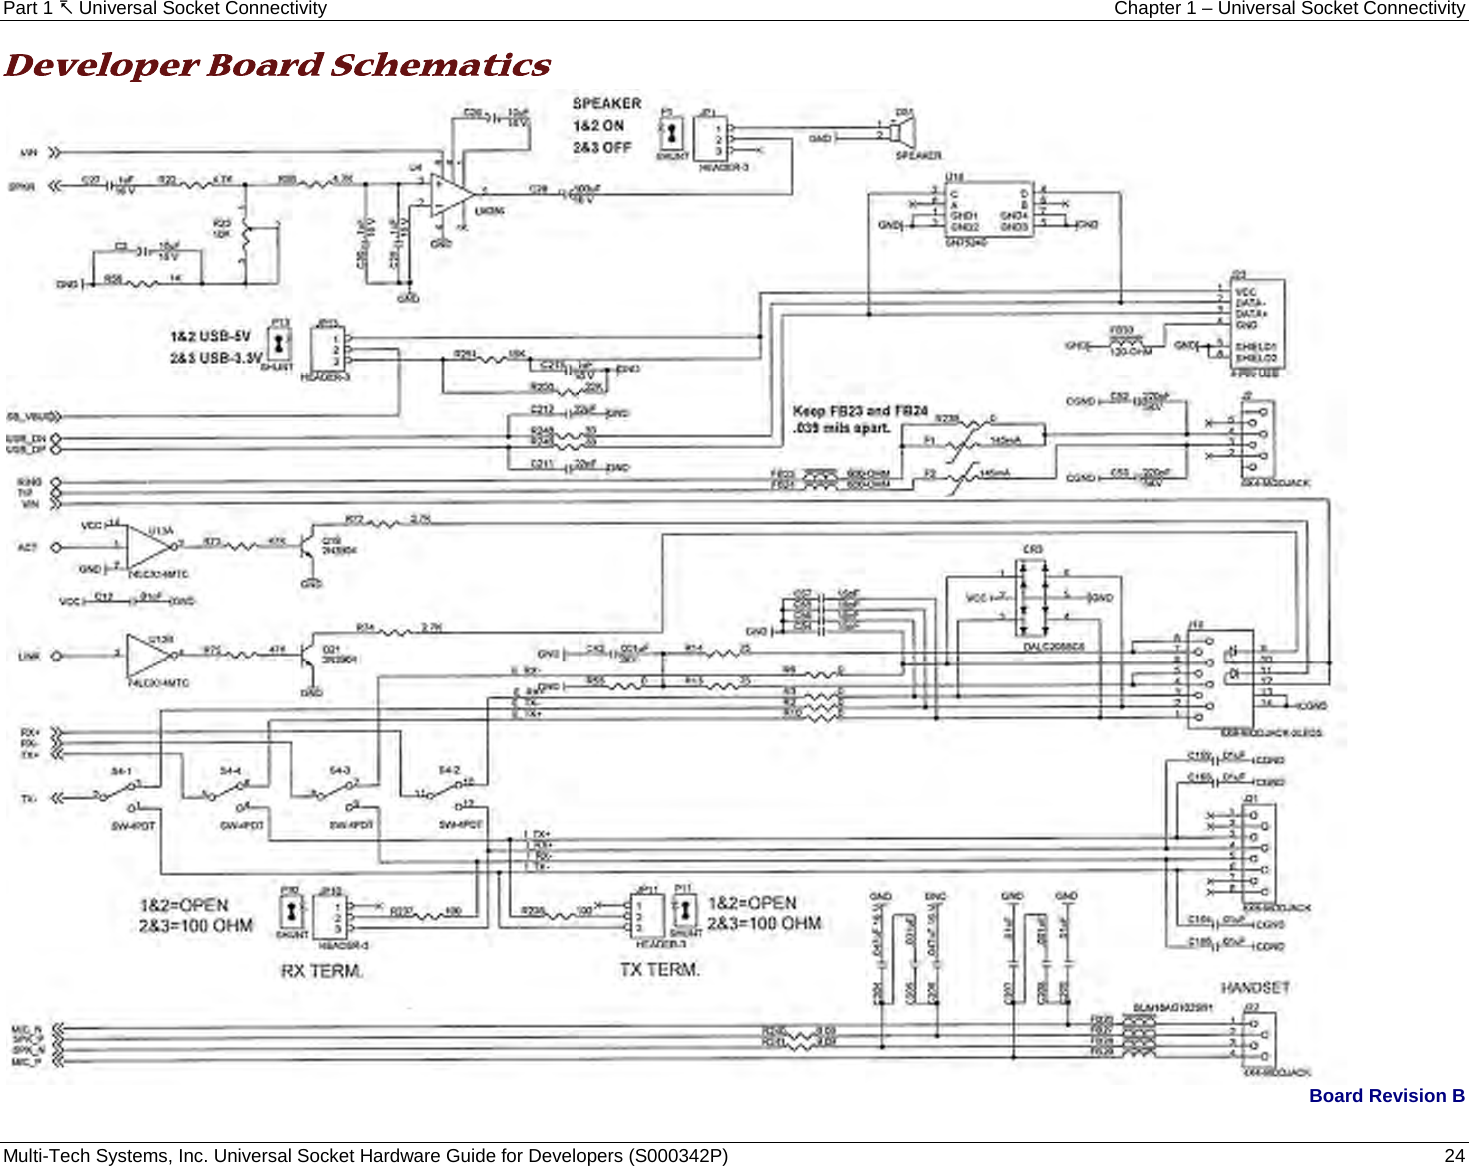 Part 1  Universal Socket Connectivity Chapter 1 – Universal Socket Connectivity Multi-Tech Systems, Inc. Universal Socket Hardware Guide for Developers (S000342P)  24  Developer Board Schematics   Board Revision B    